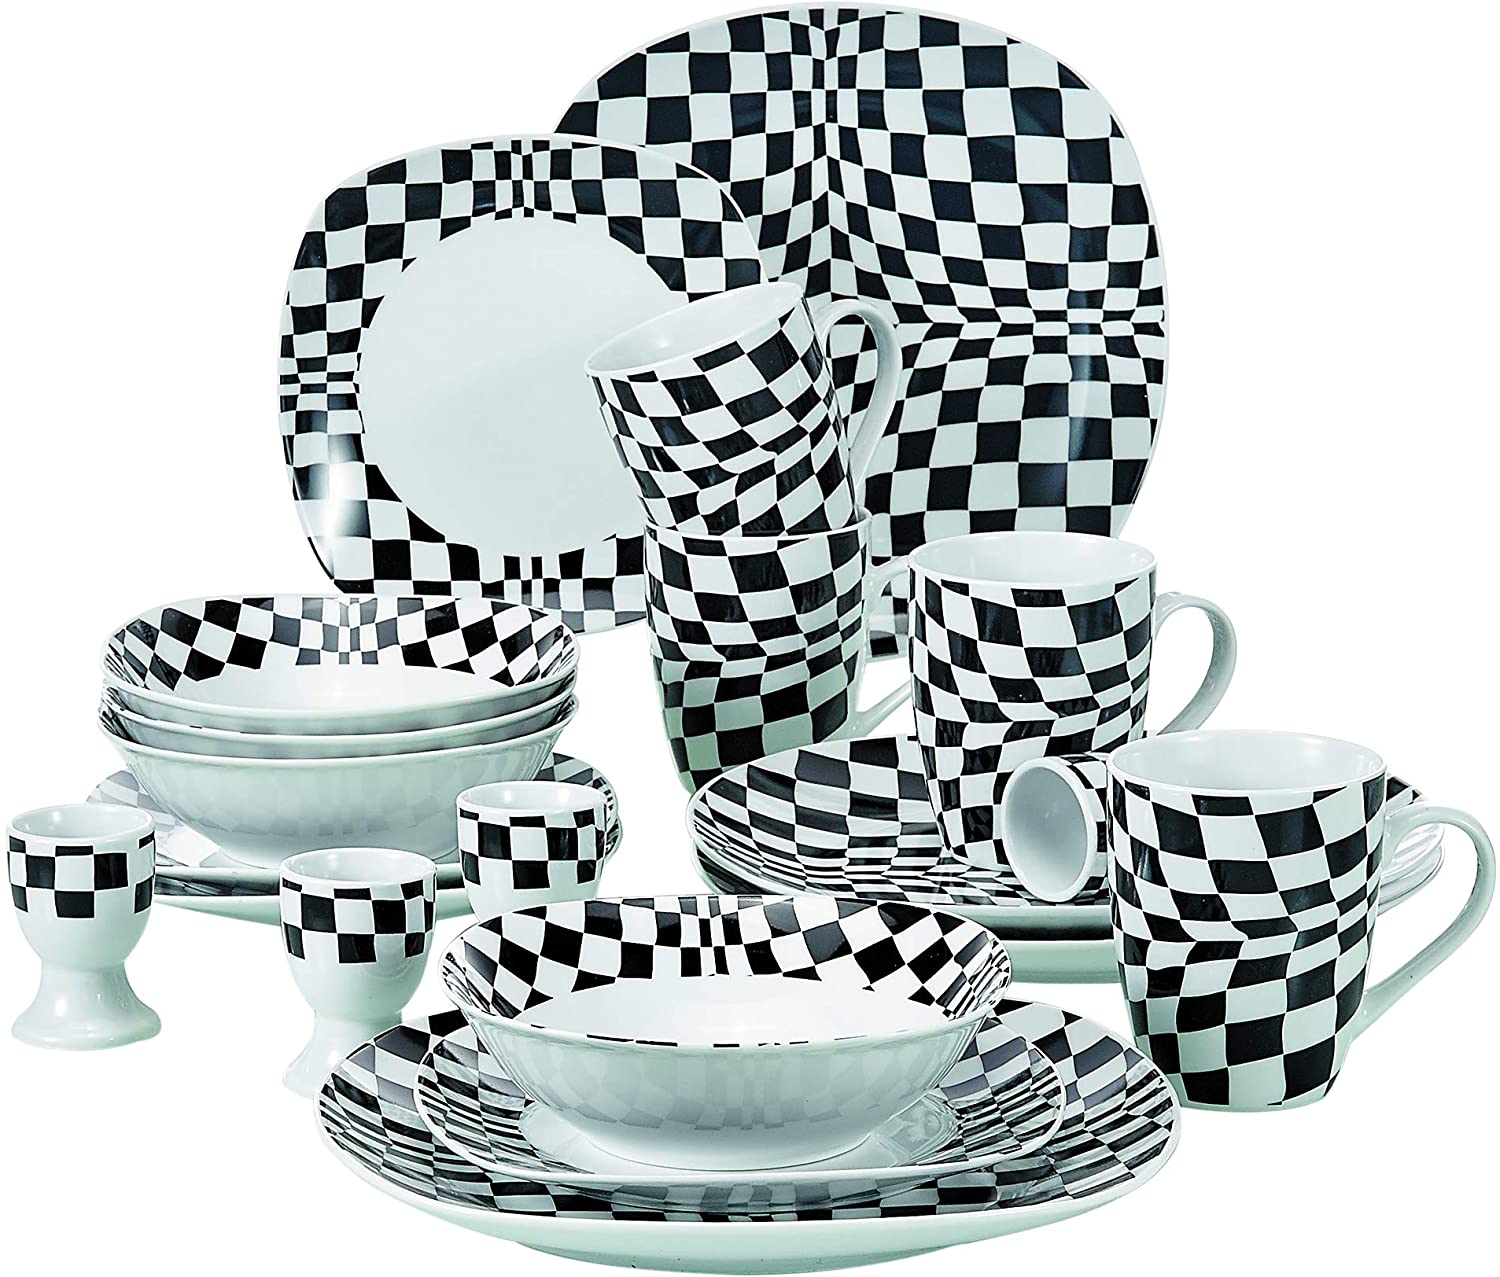 VEWEET \'Louise\' Porcelain Crockery Service 20 Pieces Breakfast Service for 4 People with 4 Egg Cups, Coffee Cups 350 ml, Cereal Bowls, Dessert Plates and Flat Plates